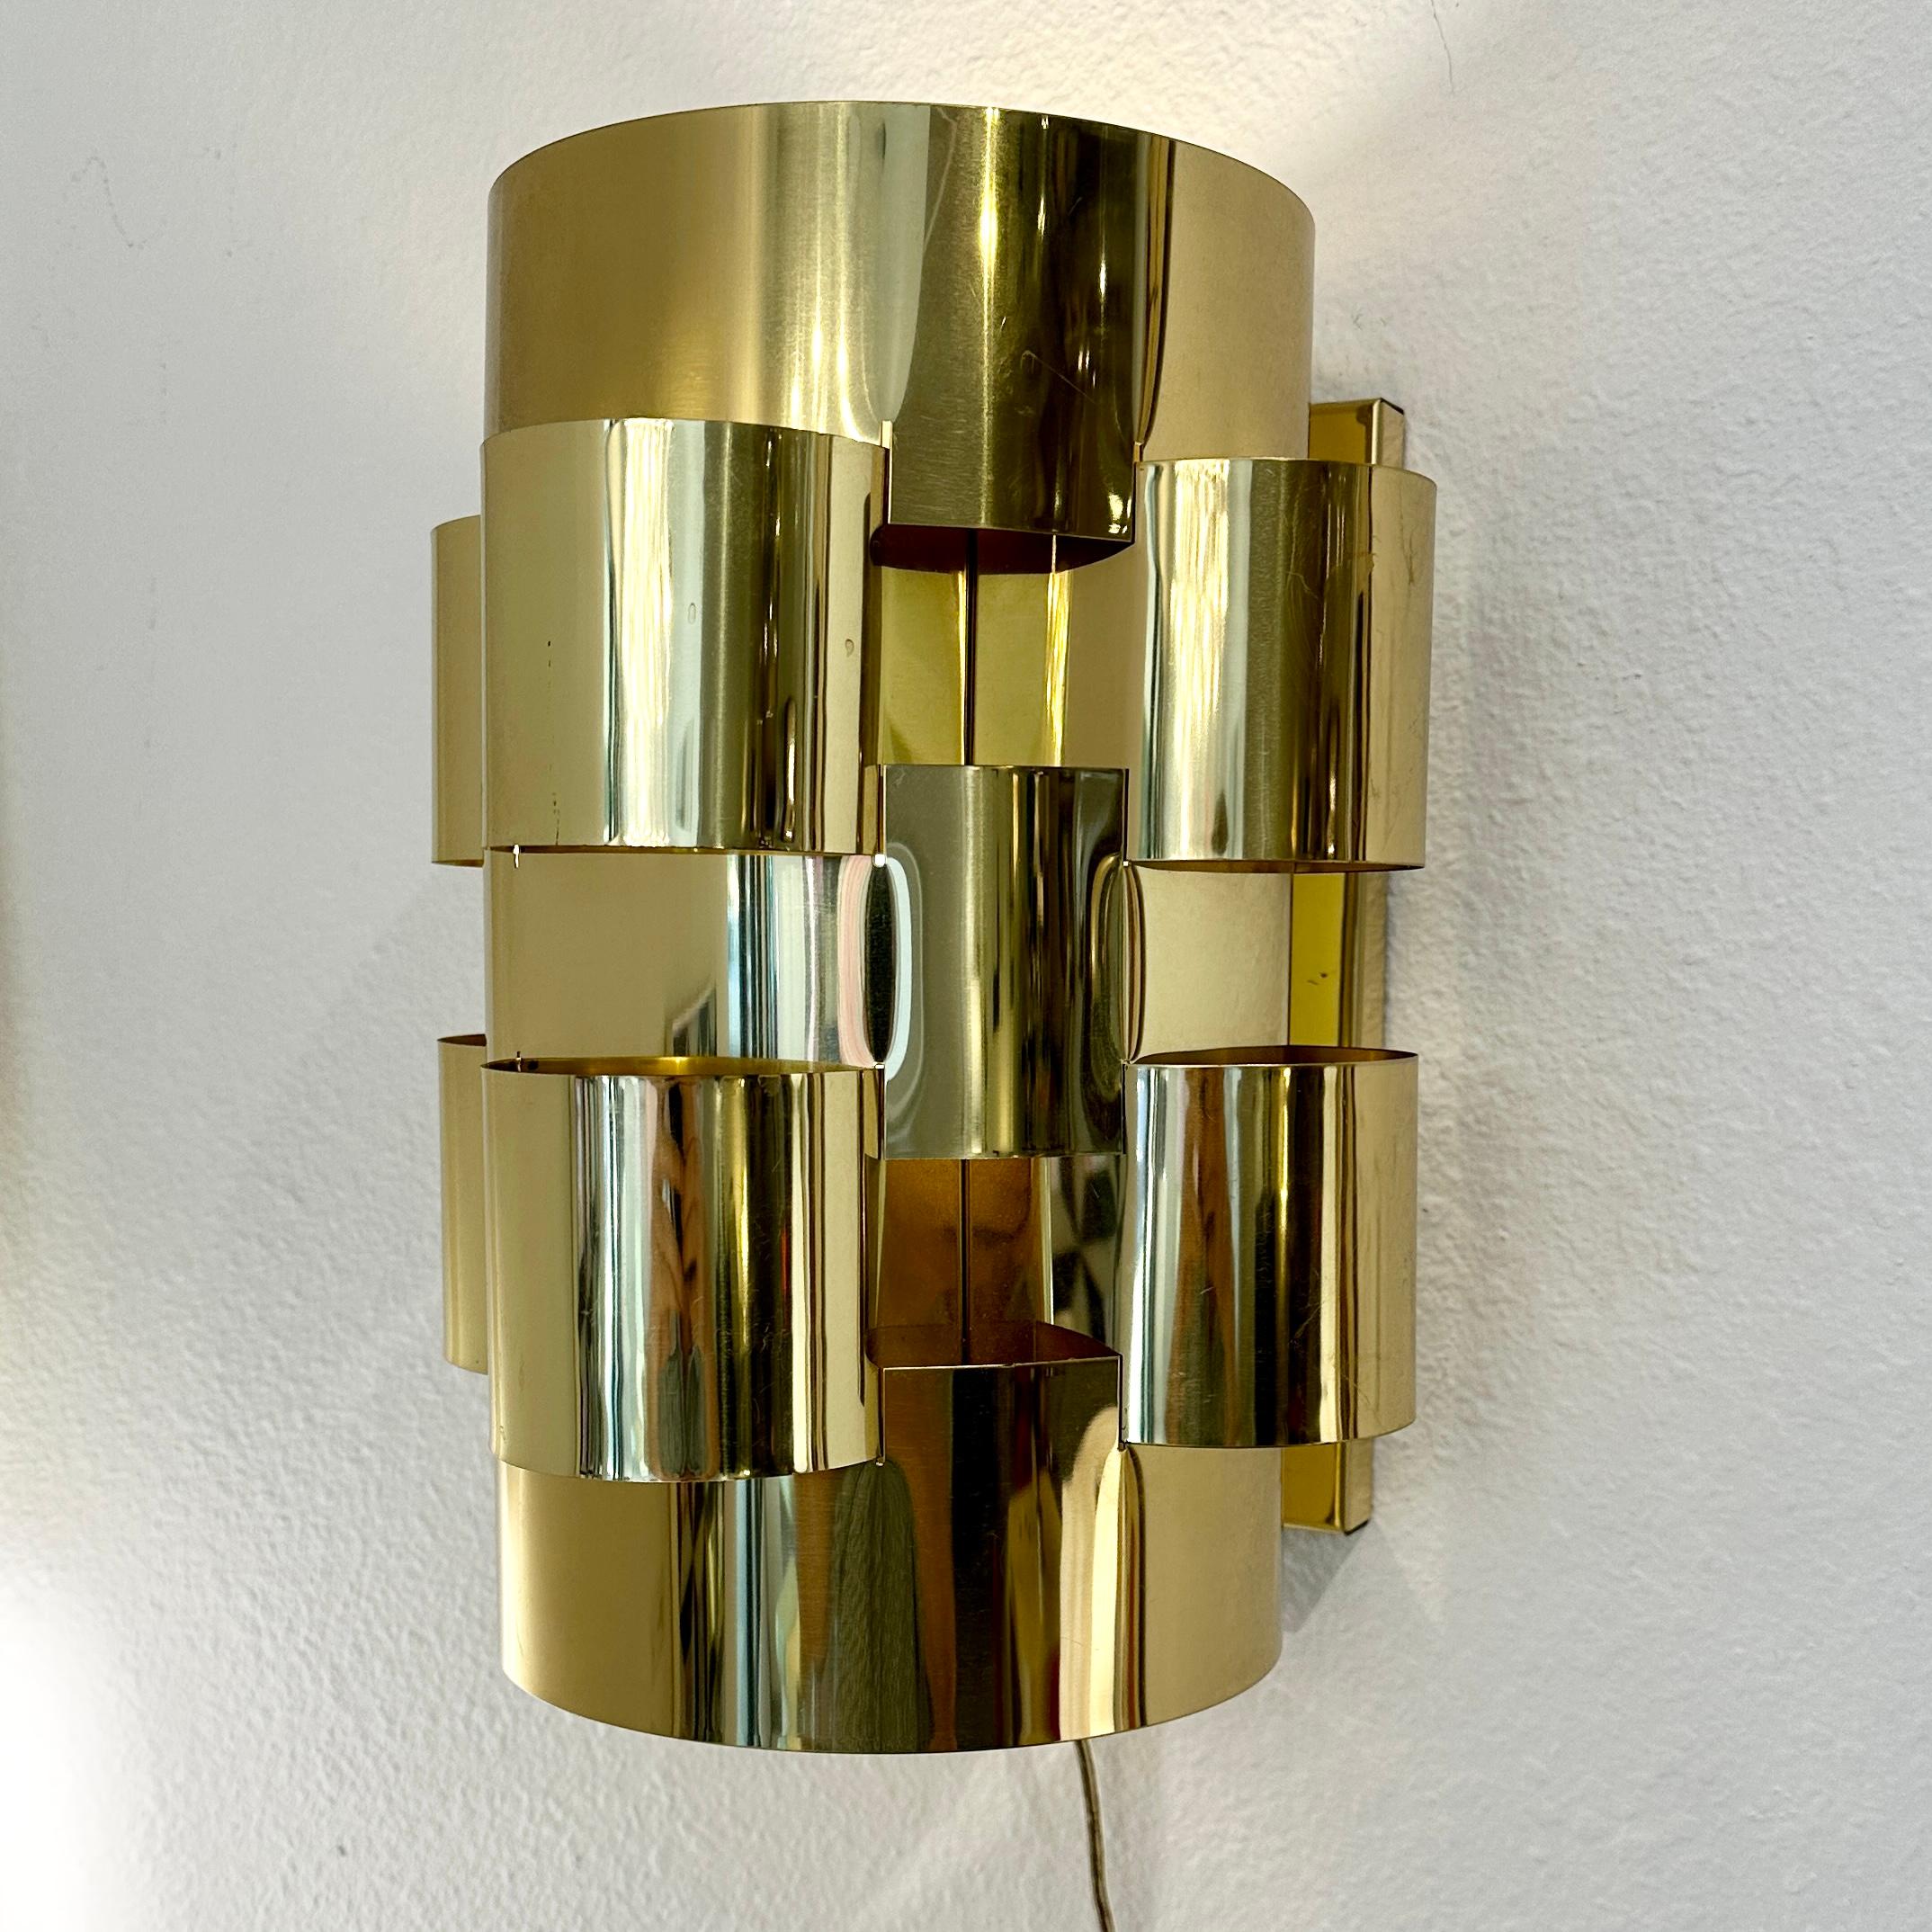 Curtis Jere Brass Cloud Sconce, Signed and Labeled,  ca 1980s.

This Curtis Jere Sconce is an excellent example of late modern design.  Brass plated ribbons create a sculptural shape reminiscent of 80s elegance.  

Although the fixture is